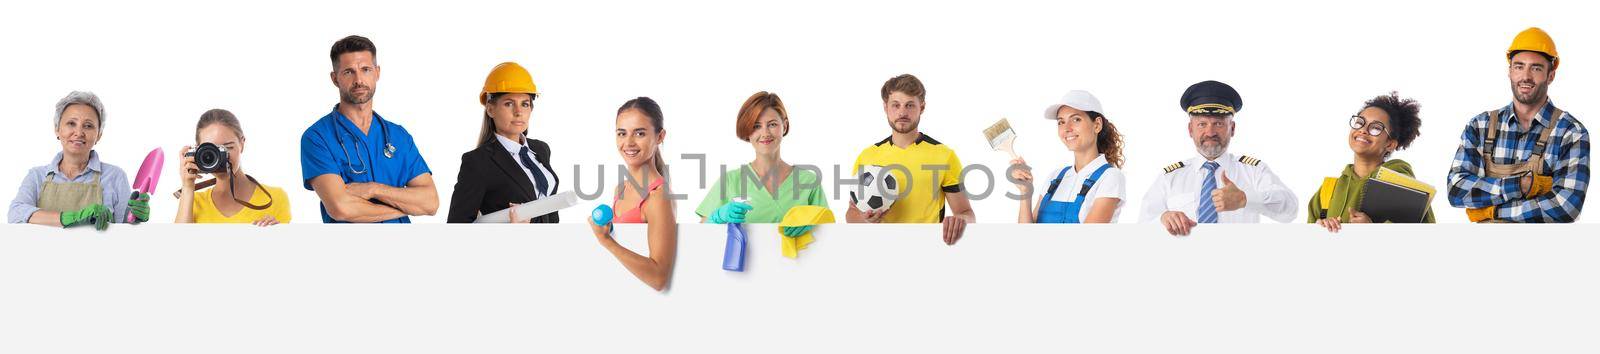 Group of professional people holding blank banner ad isolated on white background